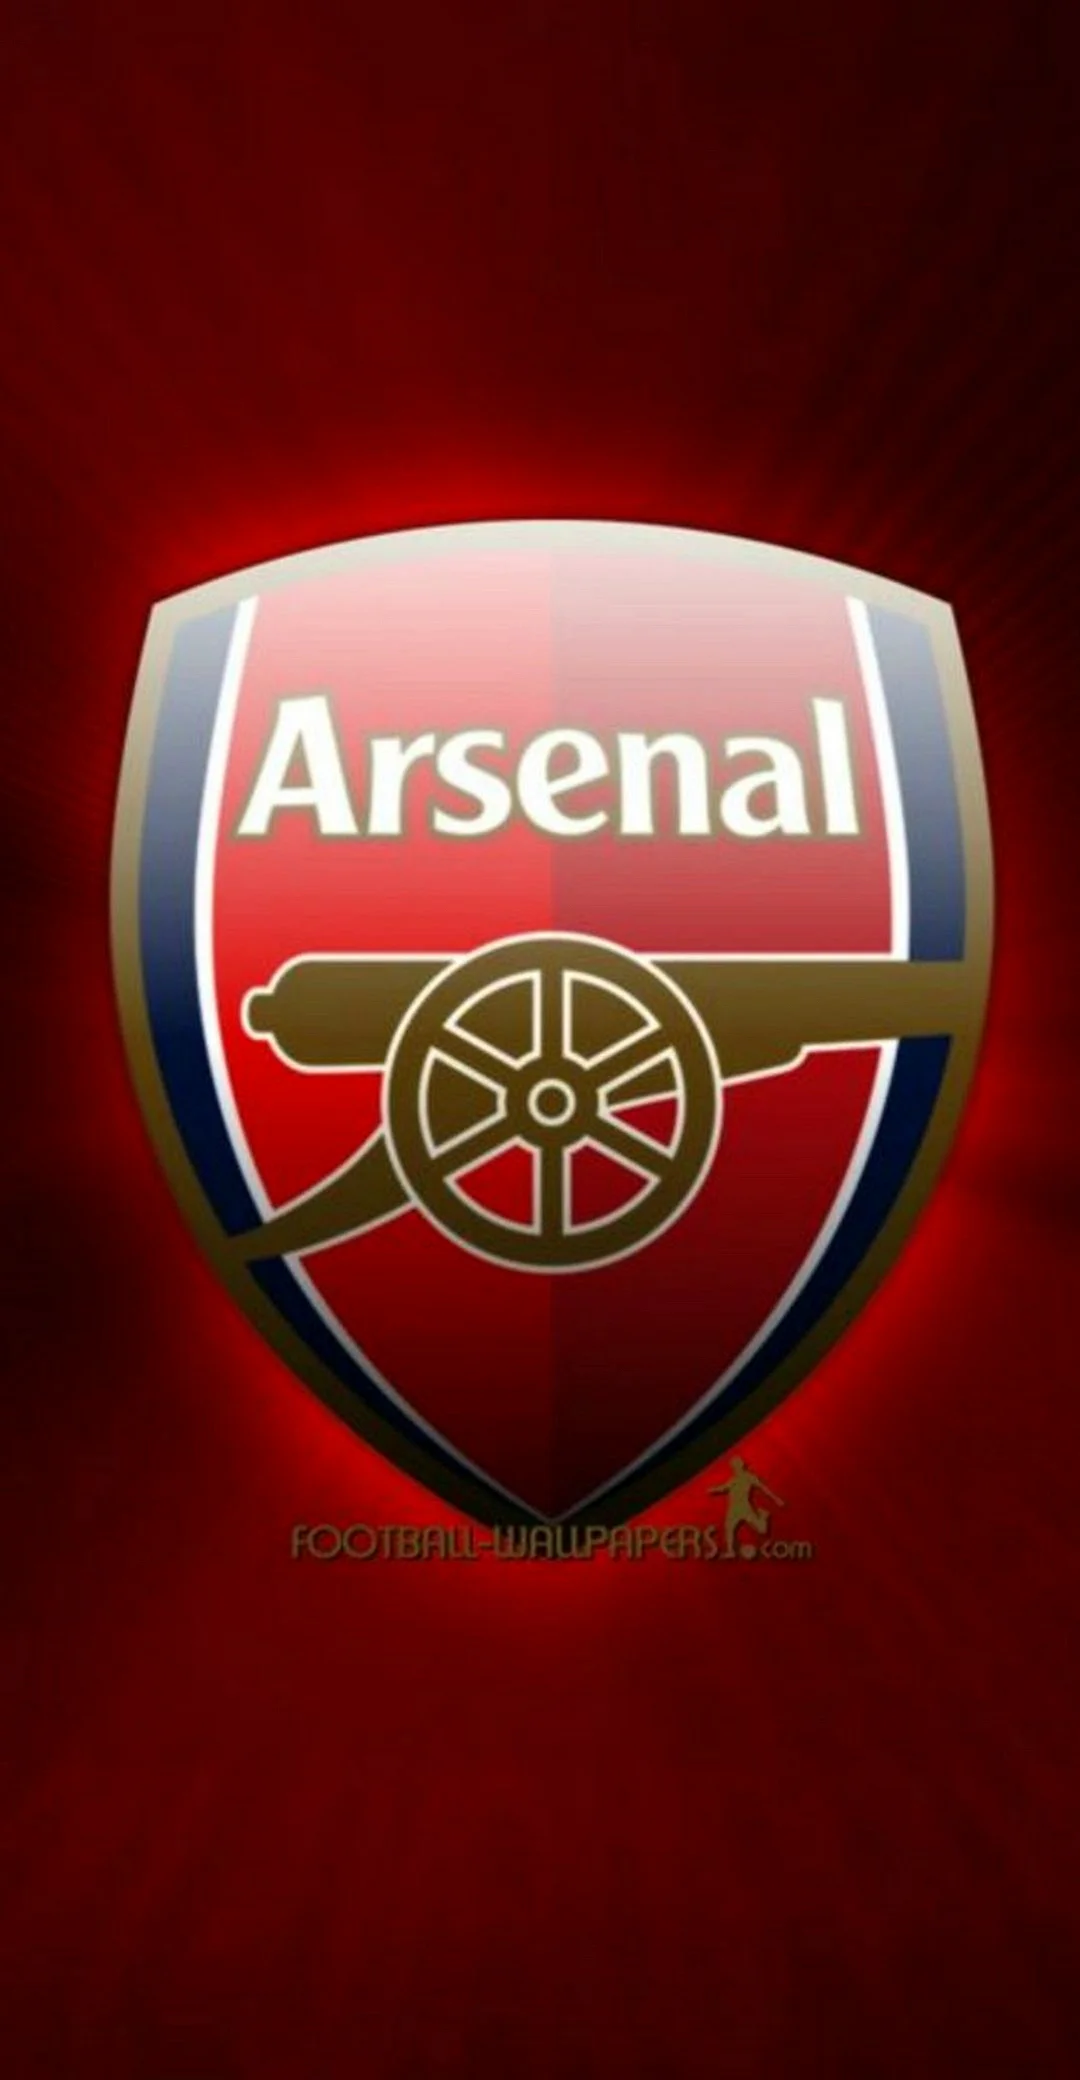 Arsenal 0203 Wallpaper For iPhone